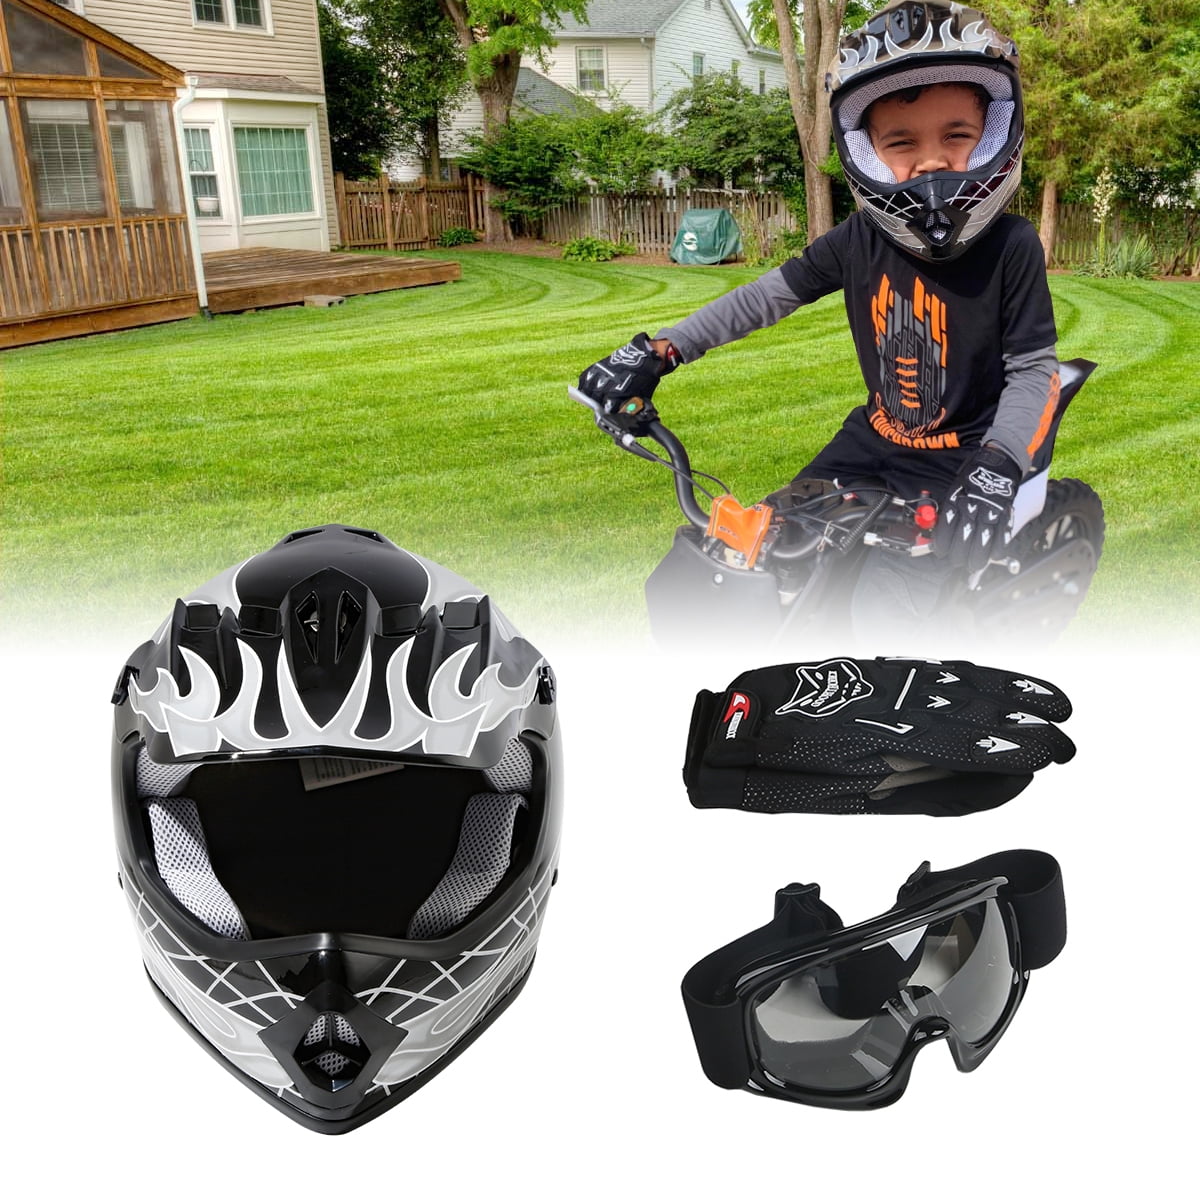 Can You Wear A Dirt Bike Helmet On The Street | lupon.gov.ph